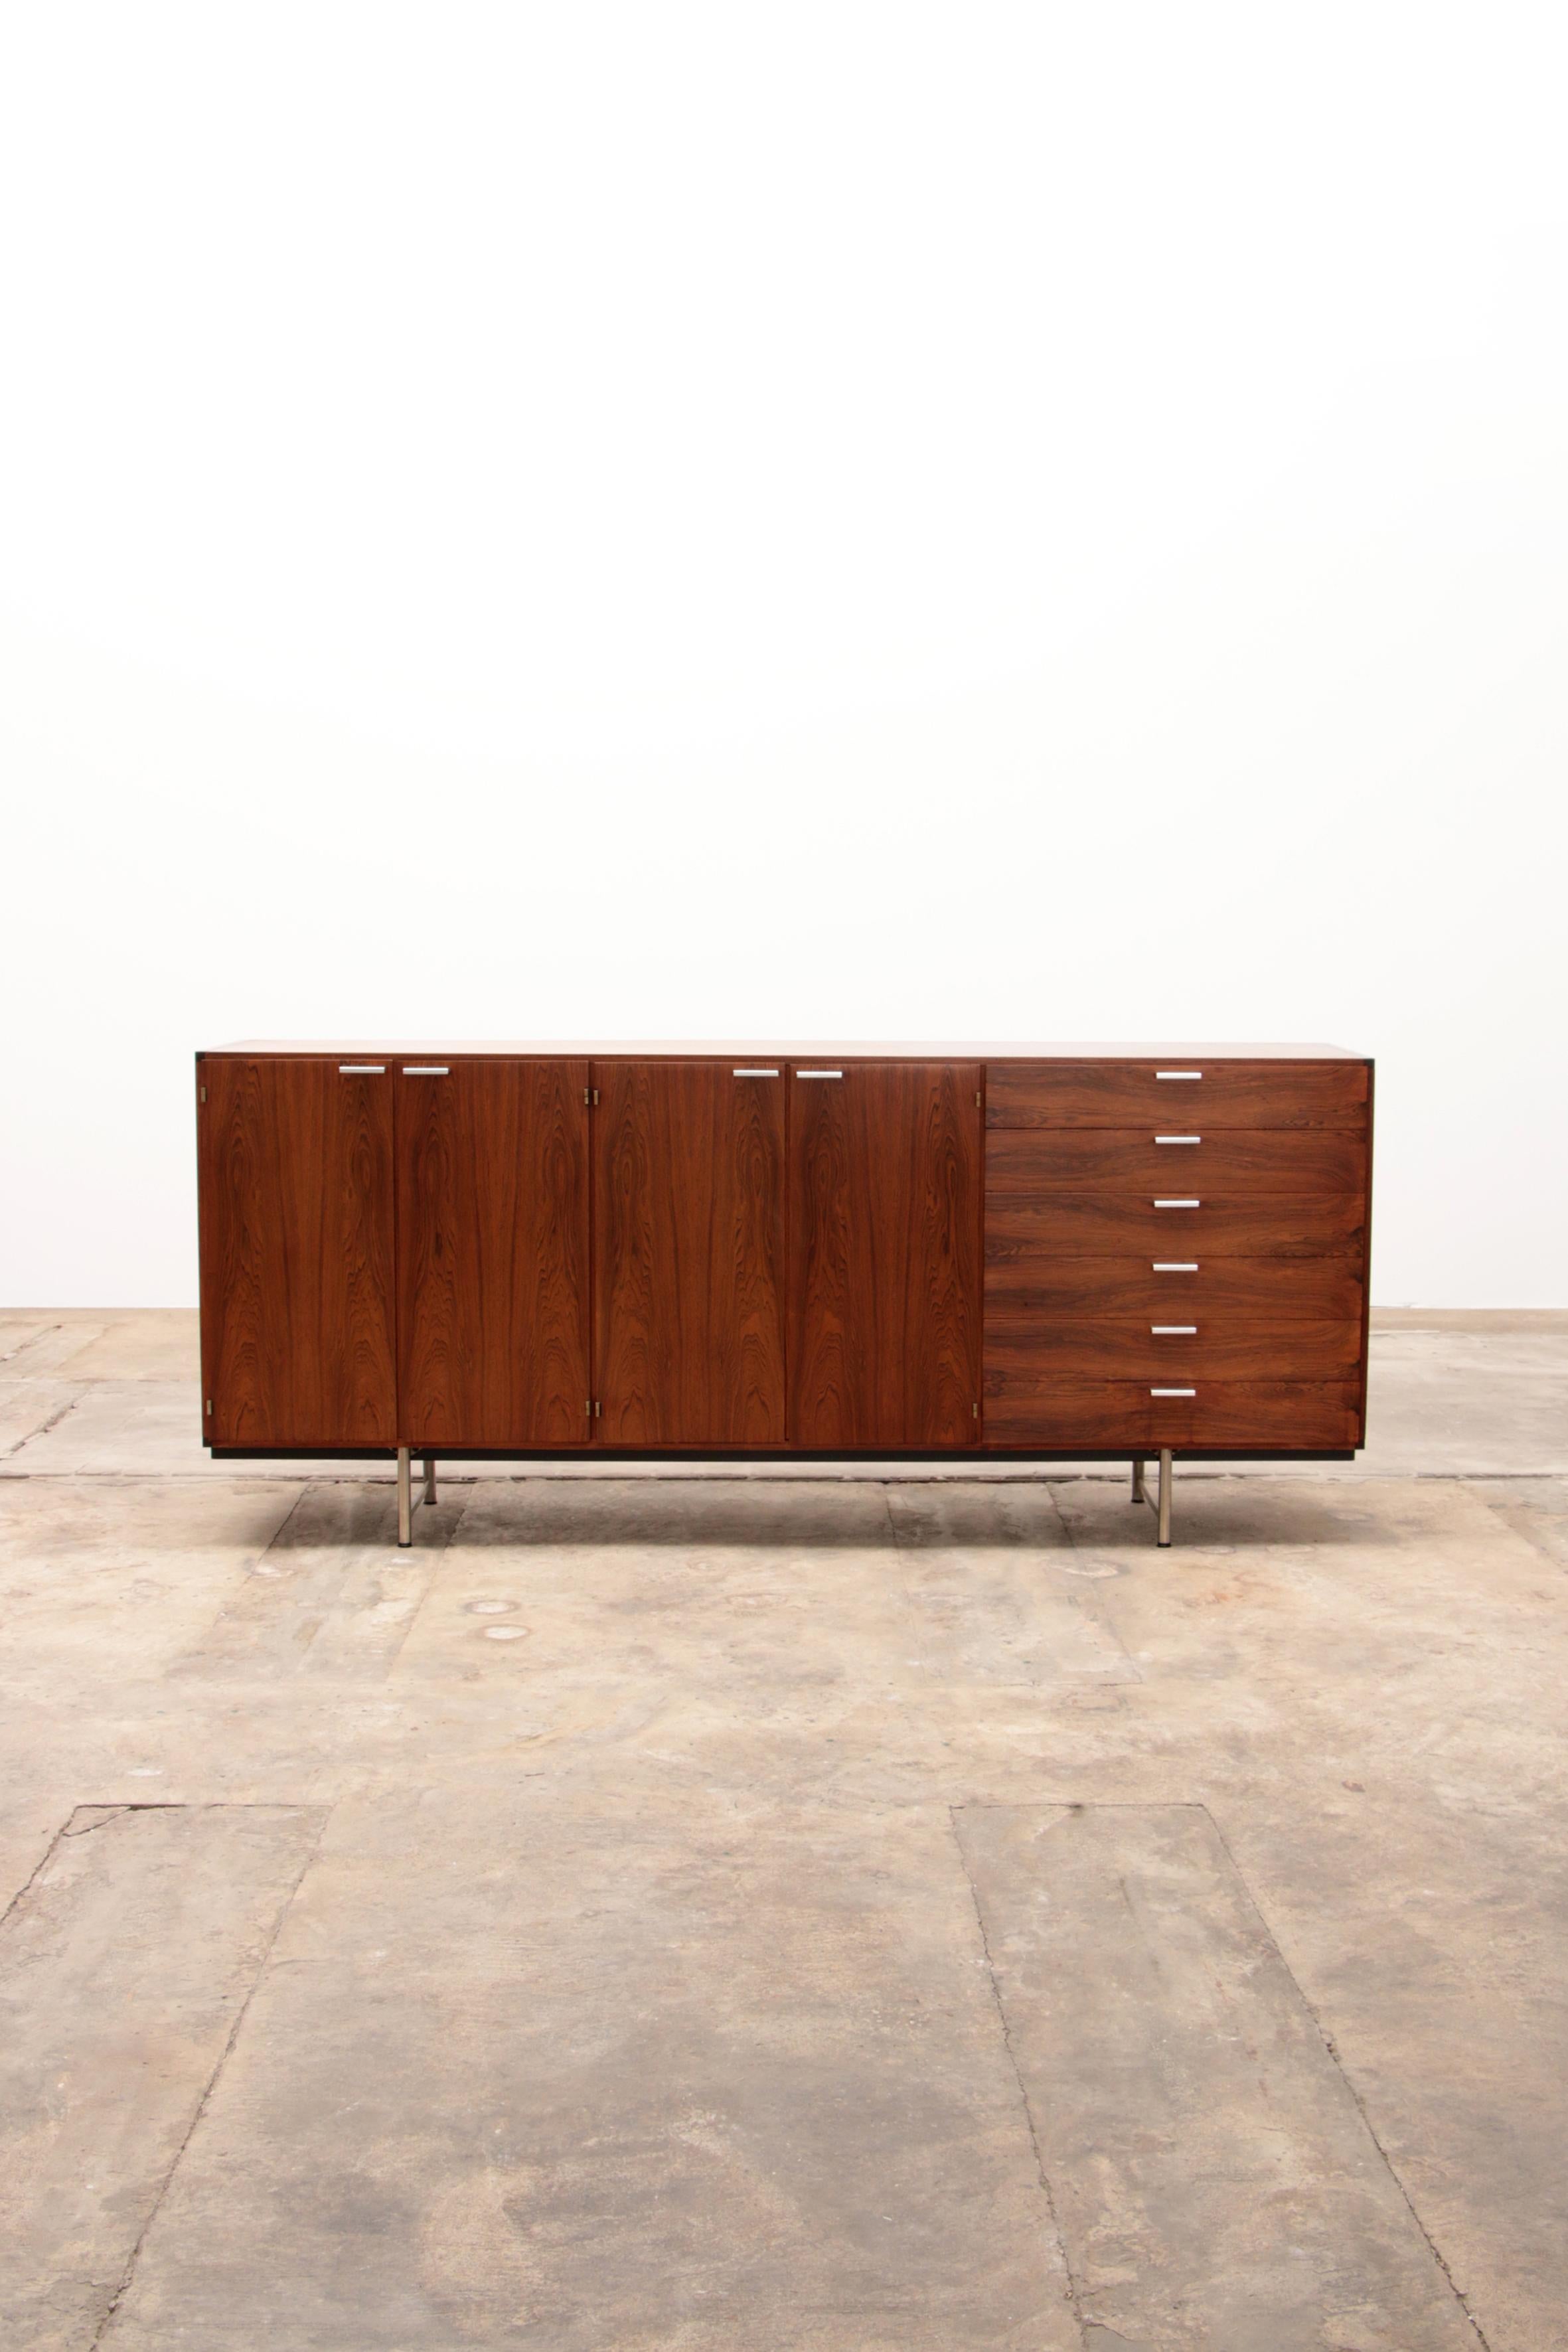 Rare Pastoe sideboard designed by Cees Braakman in the 1960s. The sideboard is made of wenge wood and stands on a sleek metal base. This version contains six drawers, four doors and 6 shelves. The top two drawers contain crockery holders and the